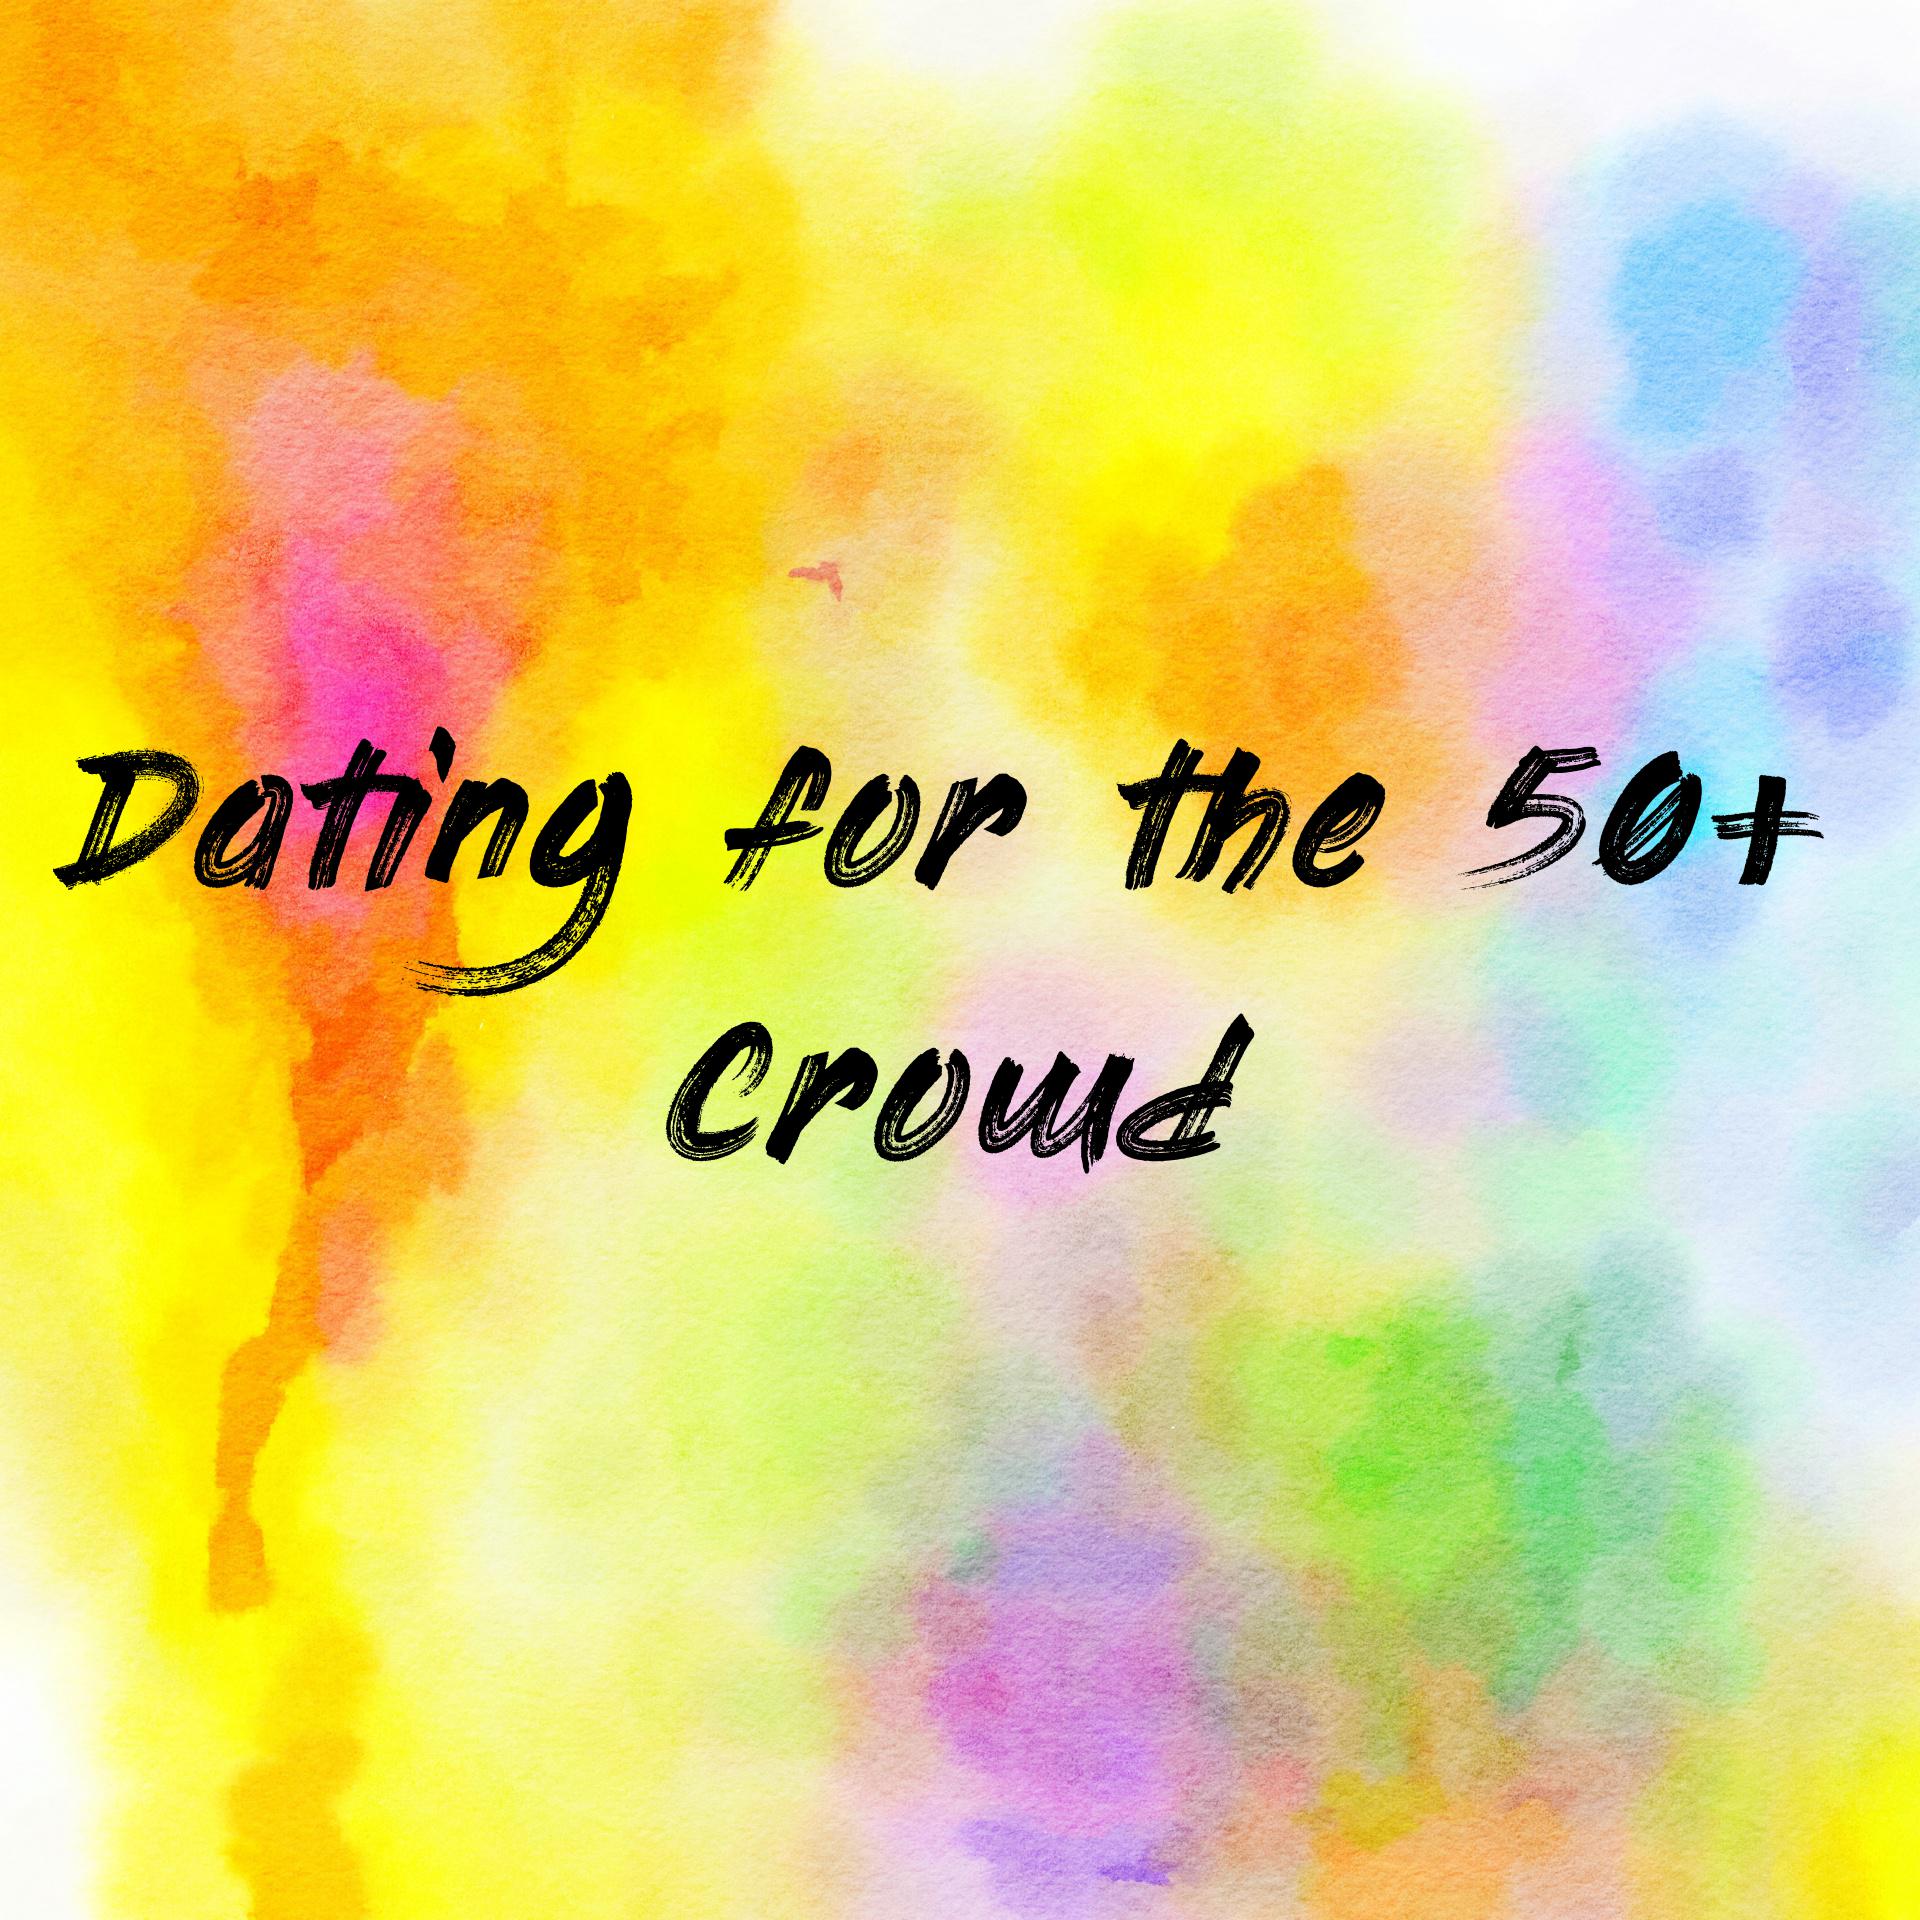 Dating for the 50+ Crowd